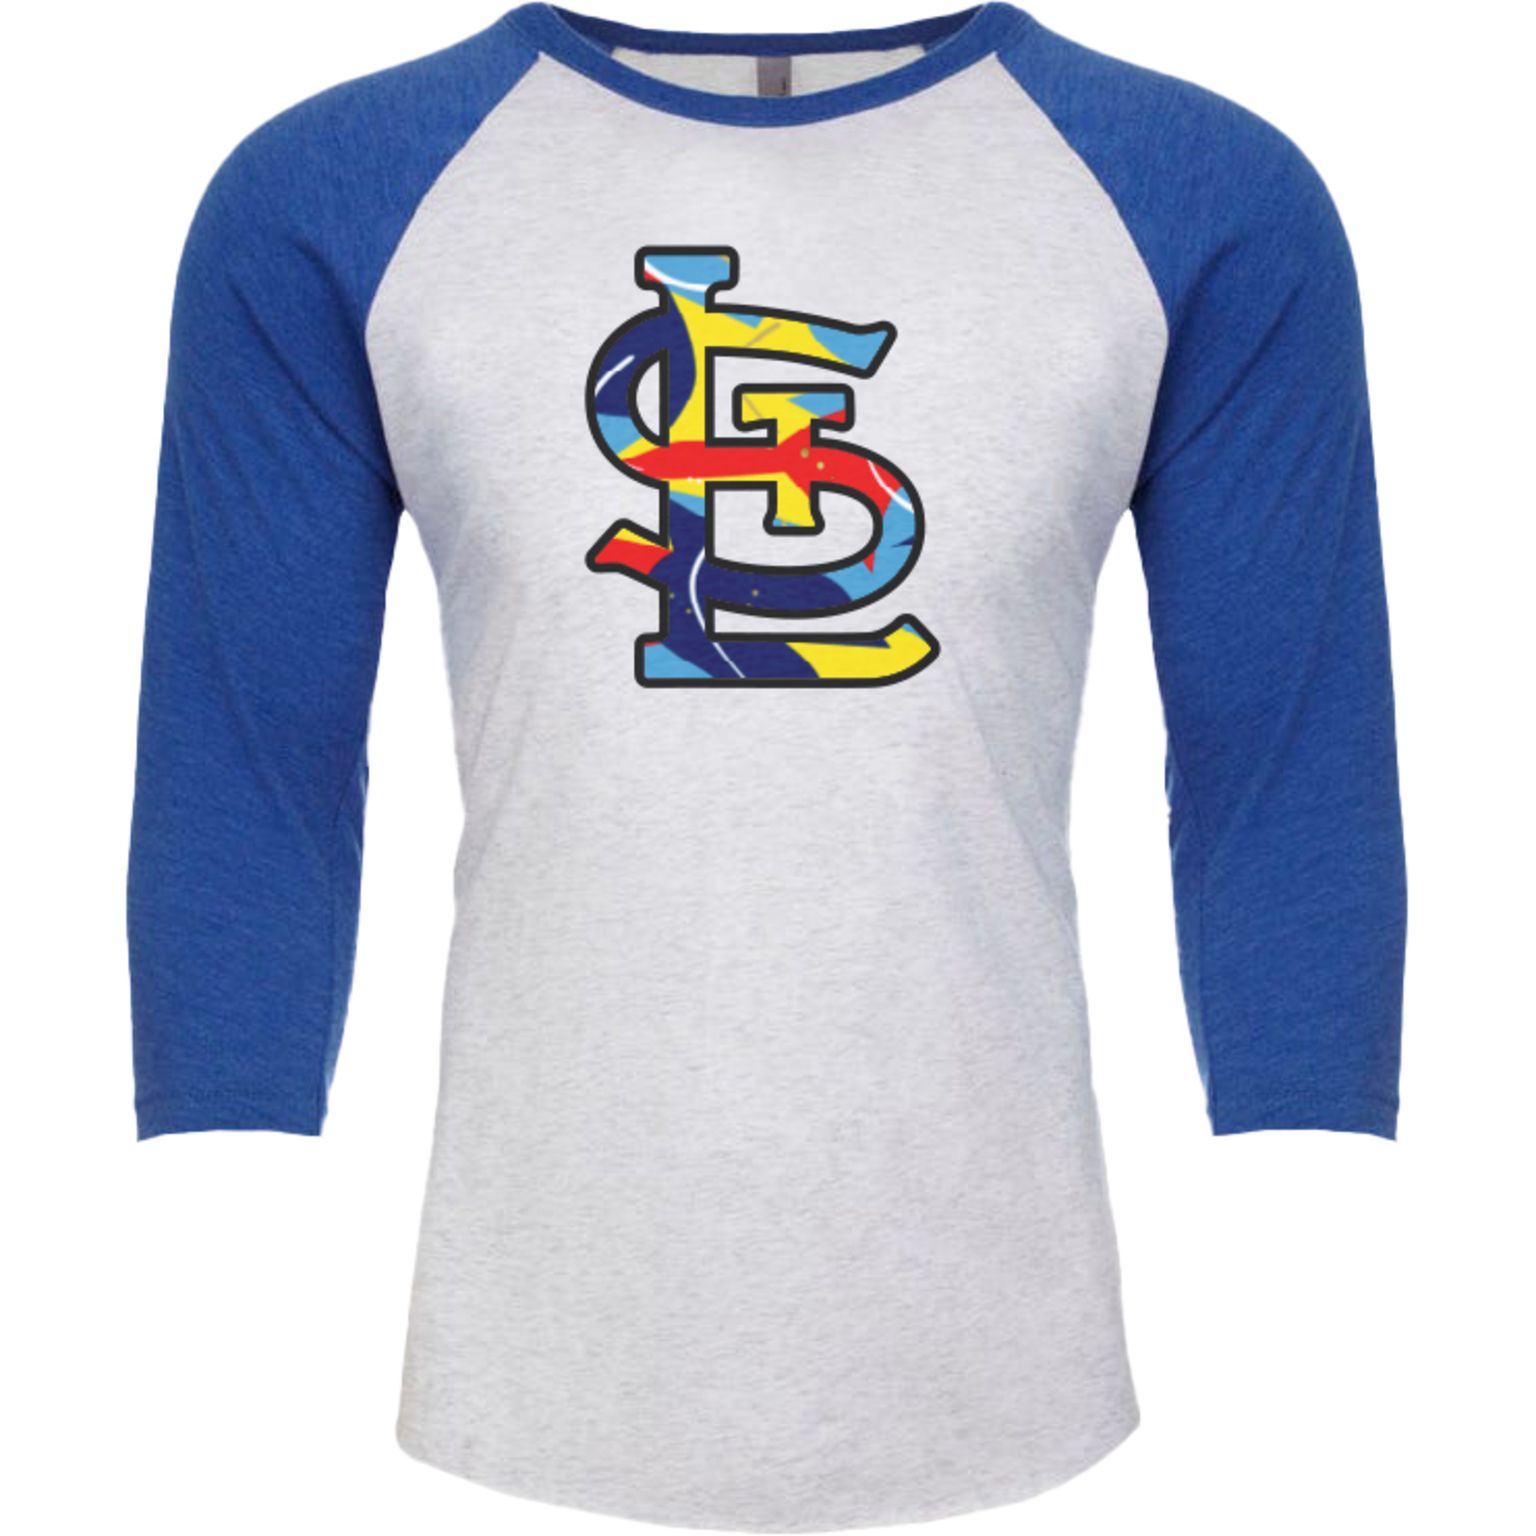 St. Louis Cardinals Jersey Logo T-Shirt from Homage. | Red | Vintage Apparel from Homage.